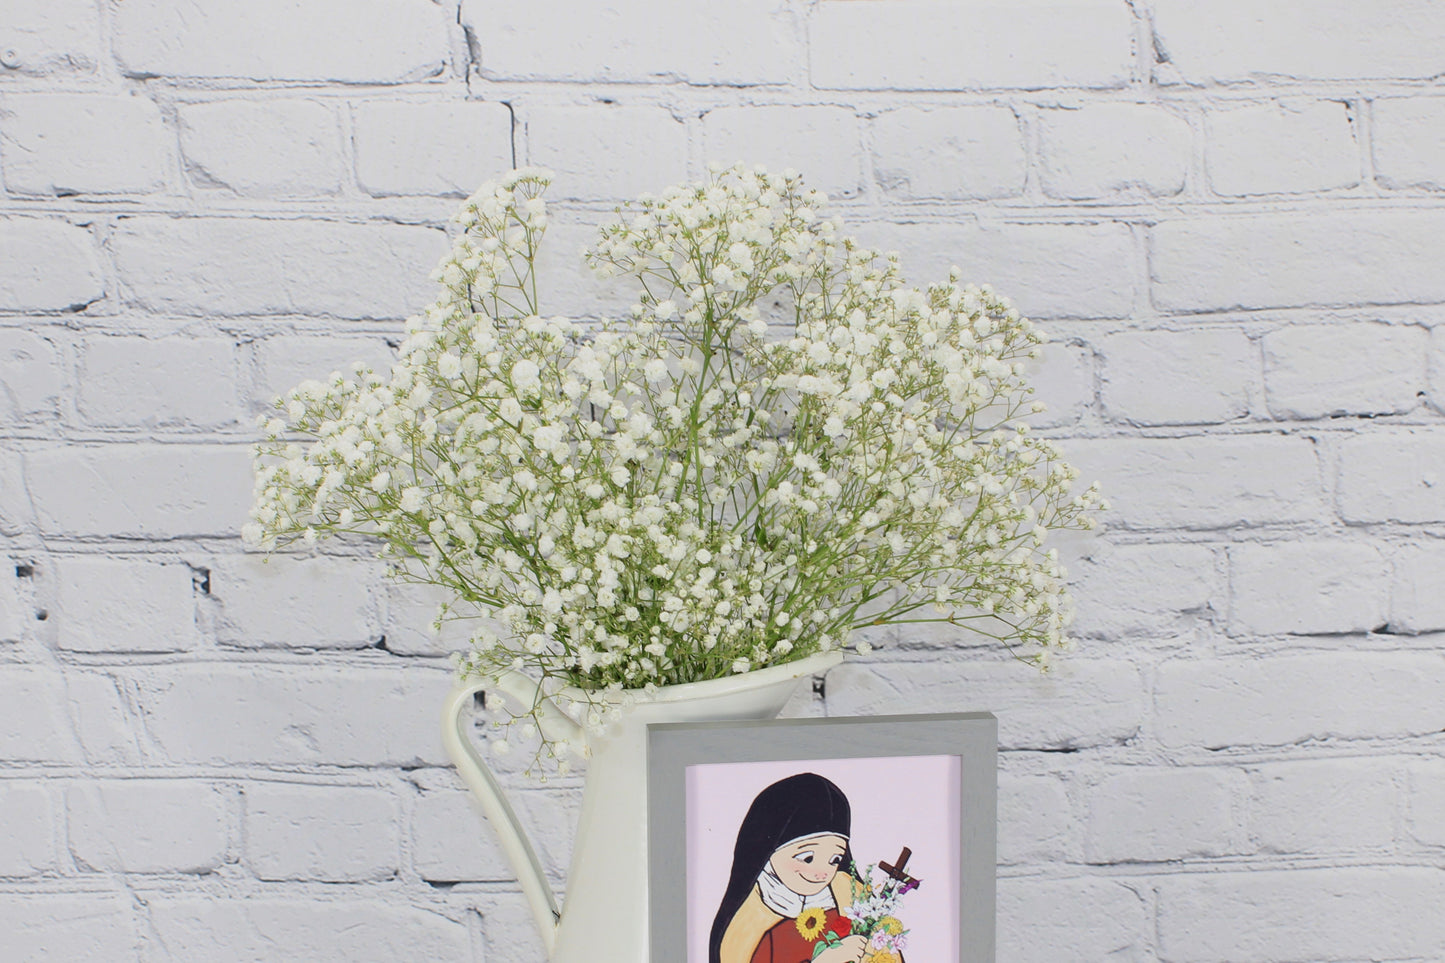 Fresh & Natural Gypsophila Excellence